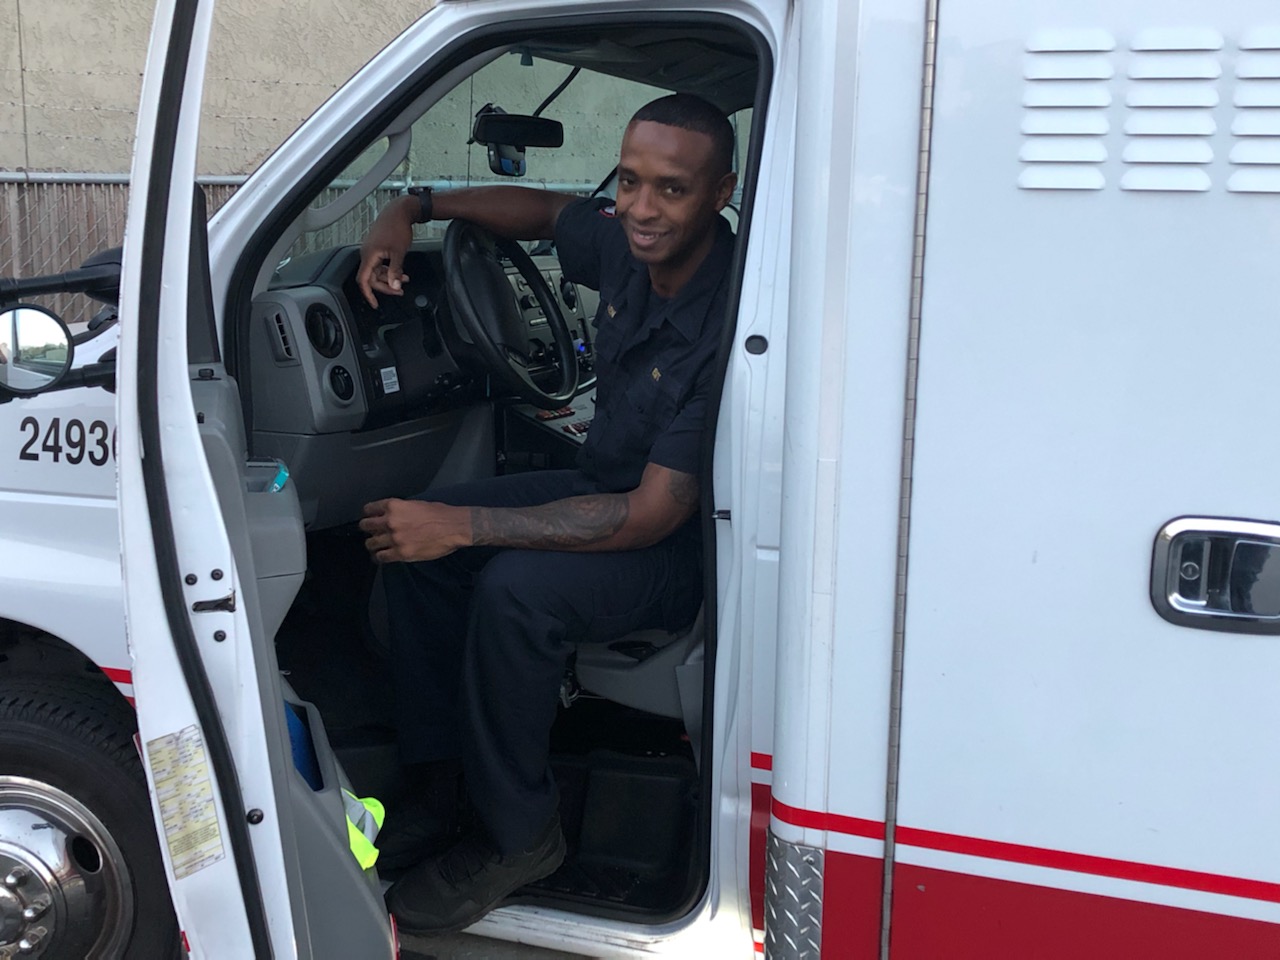 A young African American man sits in the driver's seat in an ambulance and smiles.